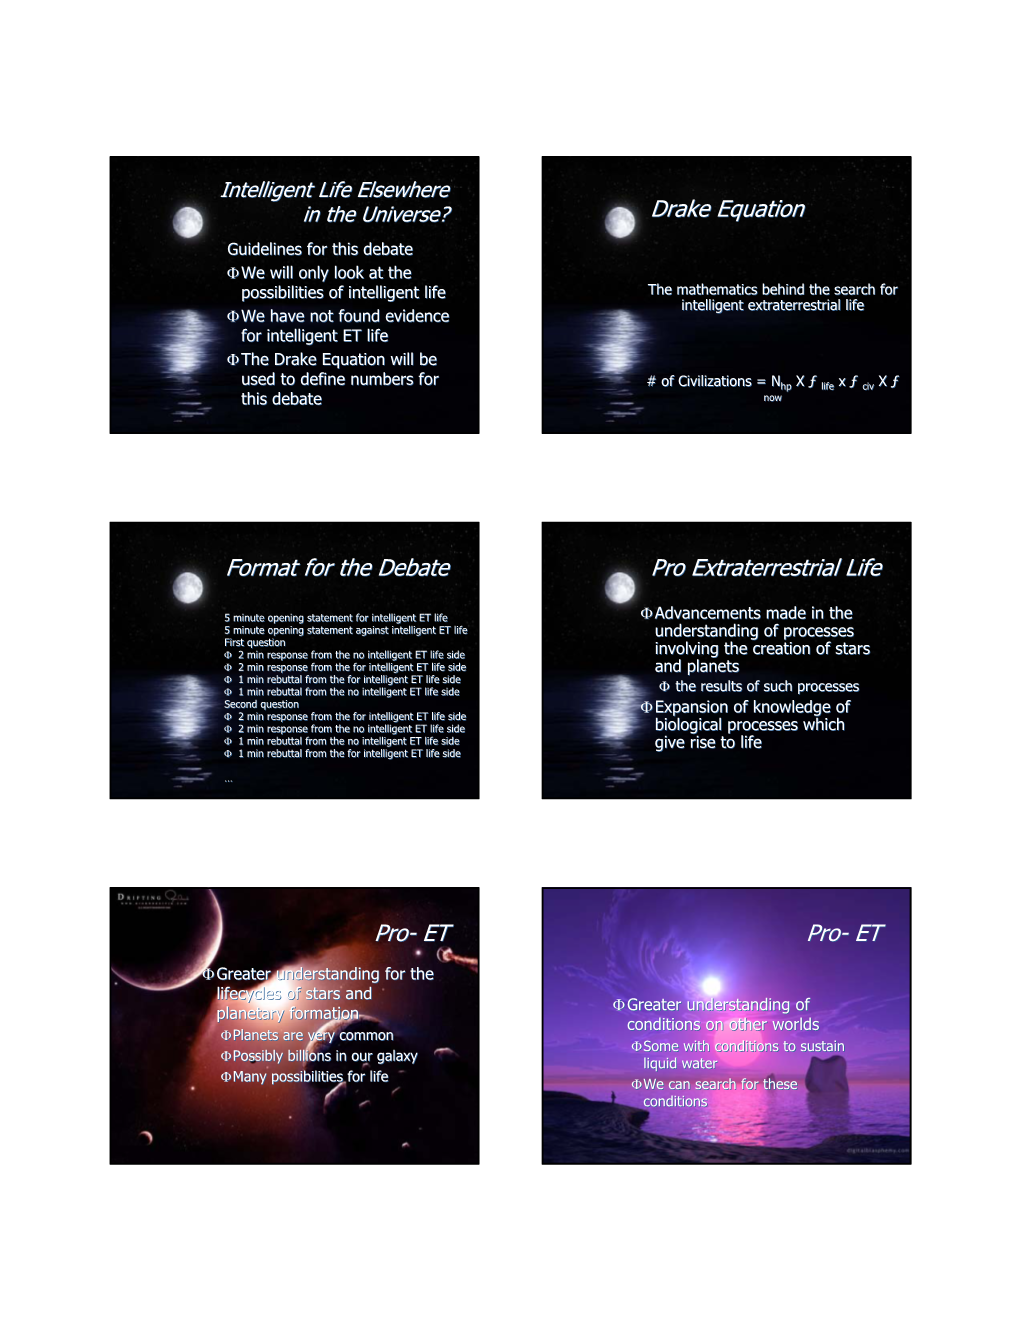 Drake Equation Format for the Debate Pro Extraterrestrial Life